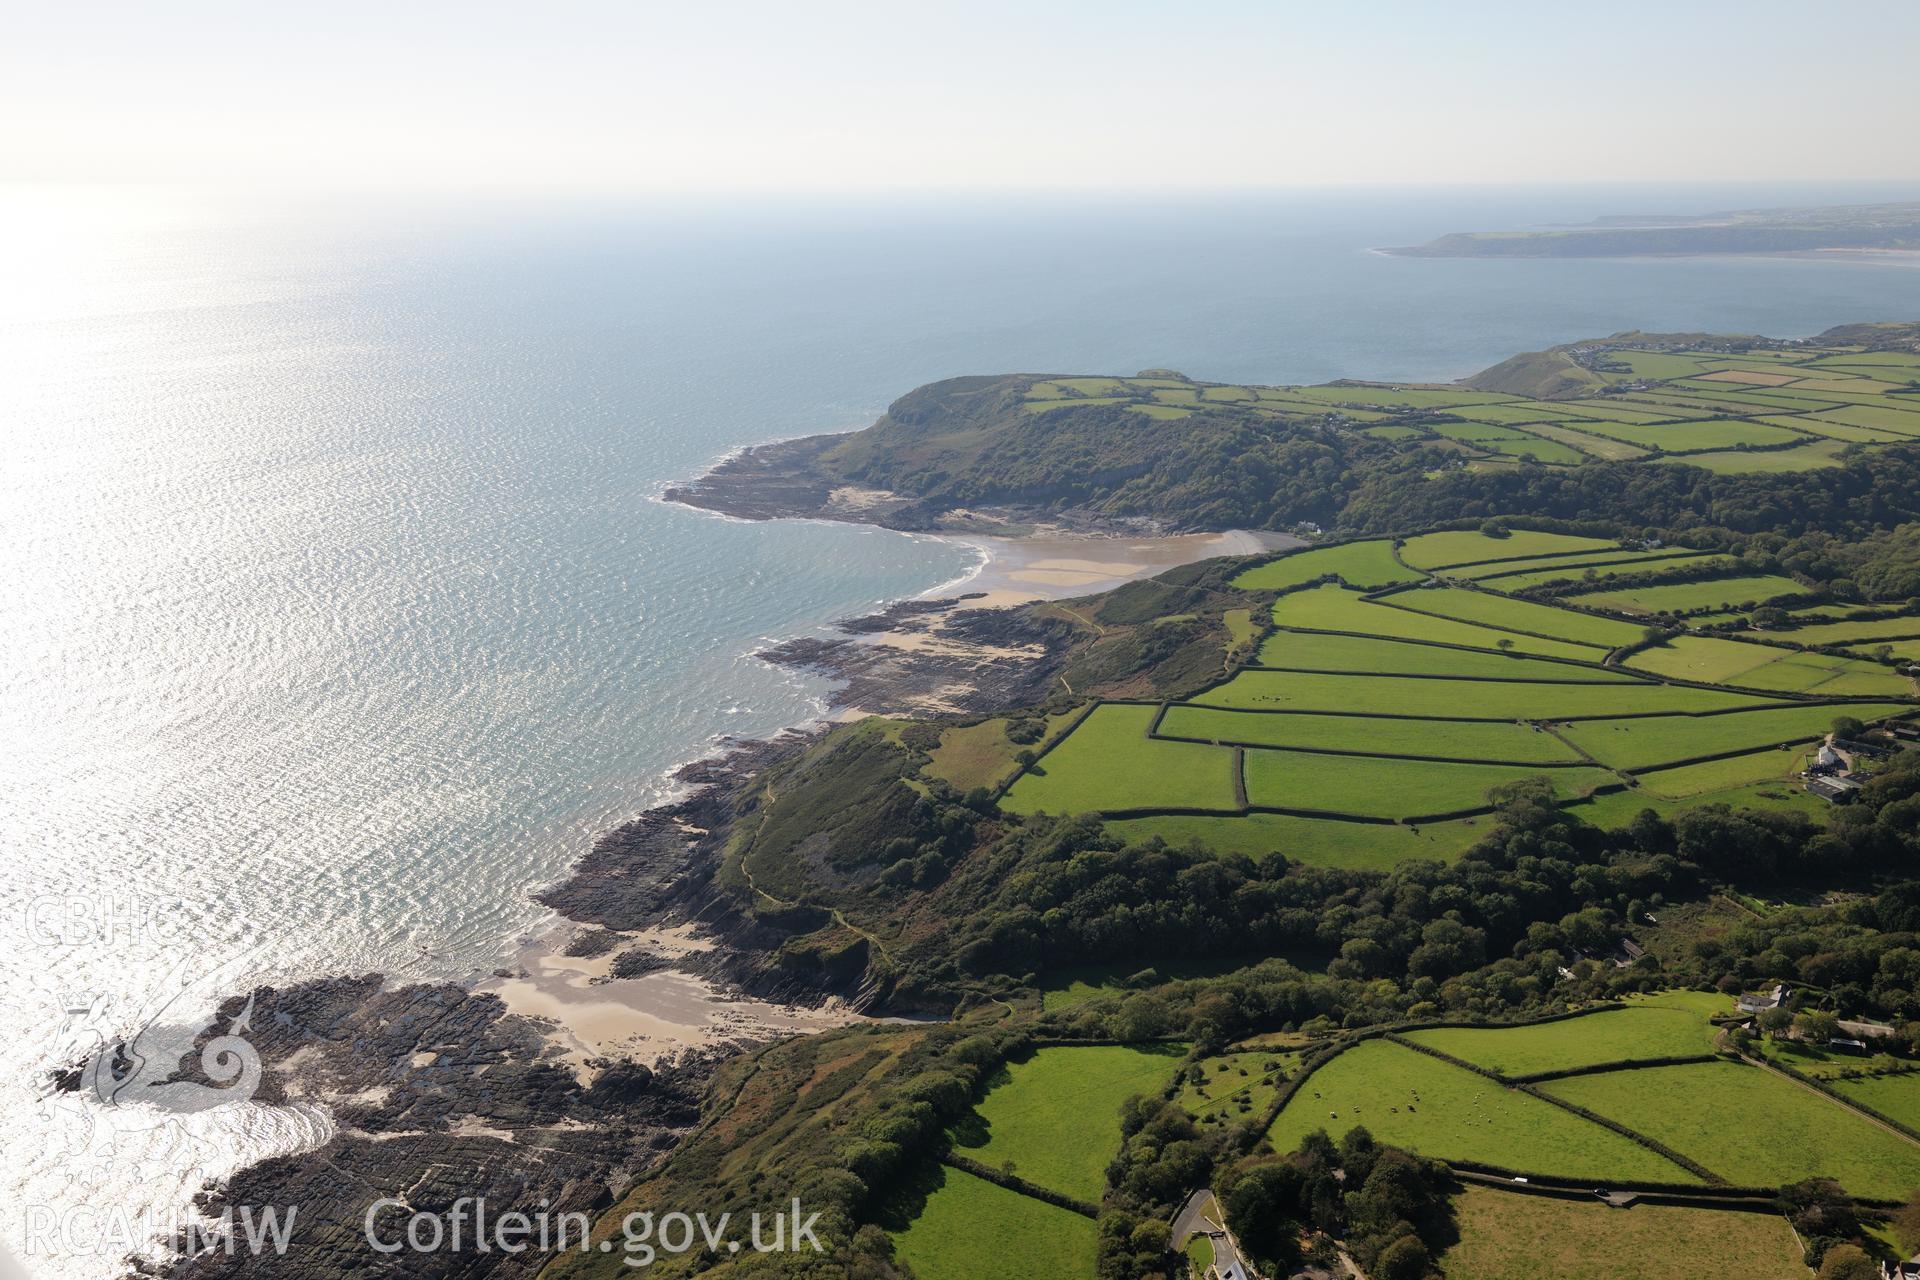 Caswell Bay, west of the Mumbles, on the southern coast of the Gower Peninsula. Oblique aerial photograph taken during the Royal Commission's programme of archaeological aerial reconnaissance by Toby Driver on 30th September 2015.